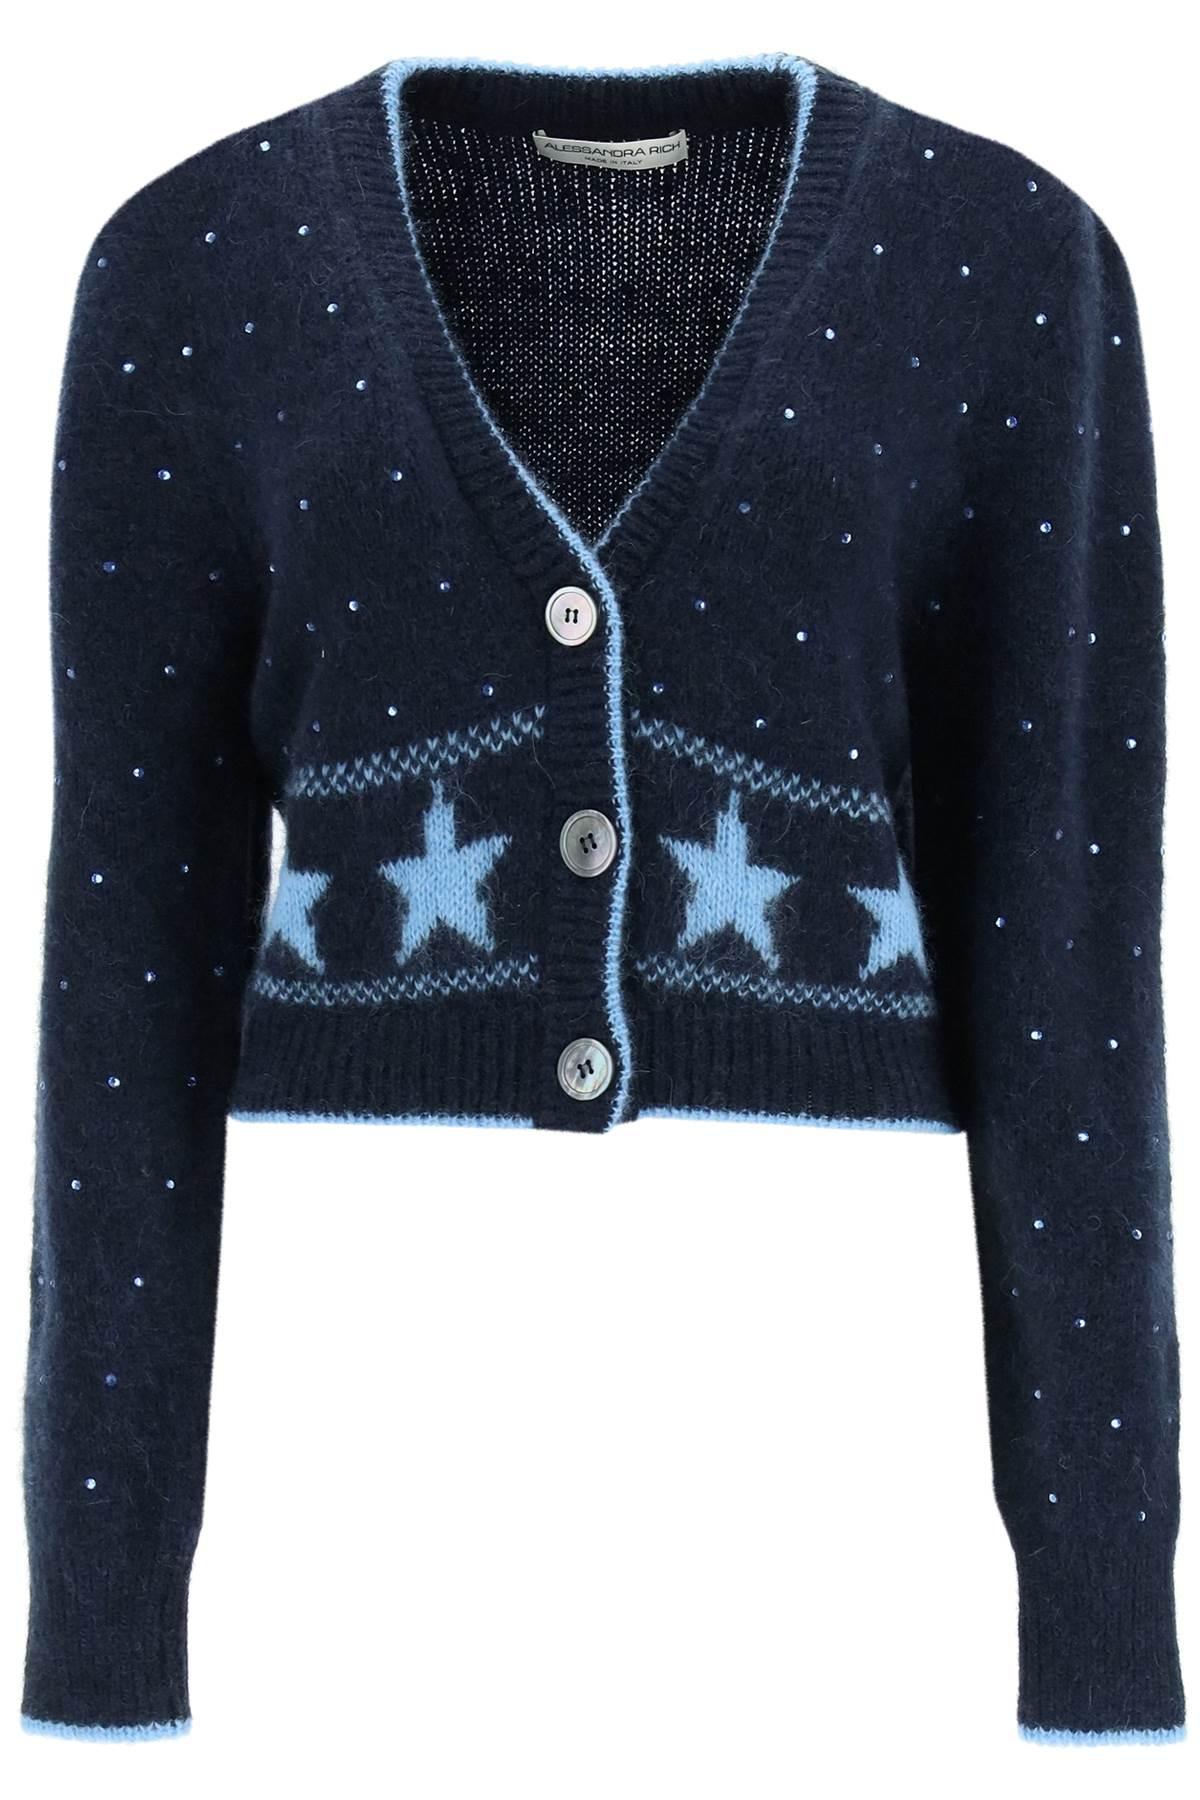 ALESSANDRA RICH WOOL AND ALPACA WOOL CARDIGAN WITH CRYSTALS